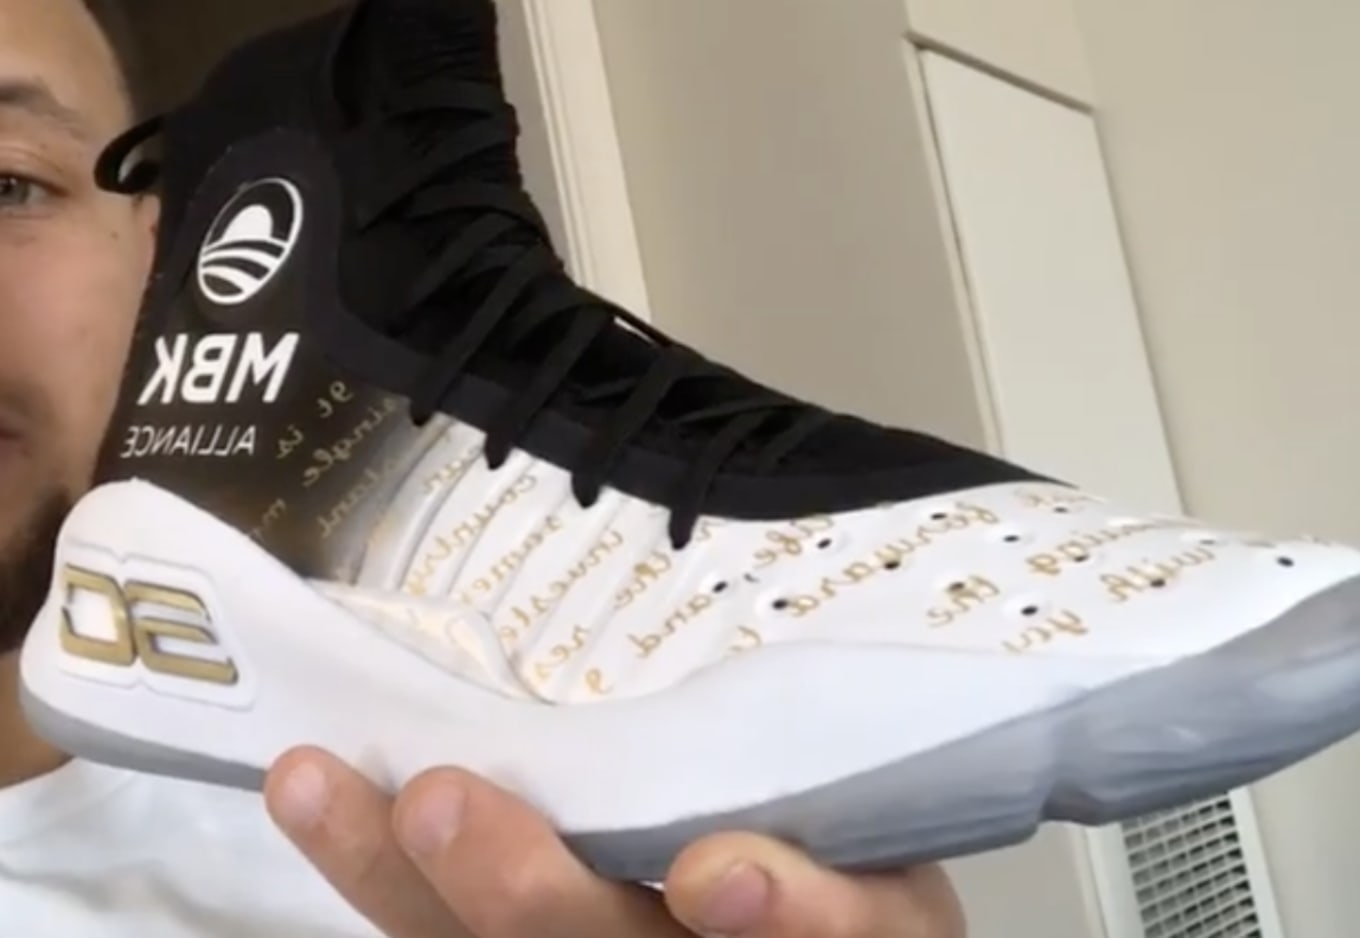 shoes stephen curry is wearing tonight